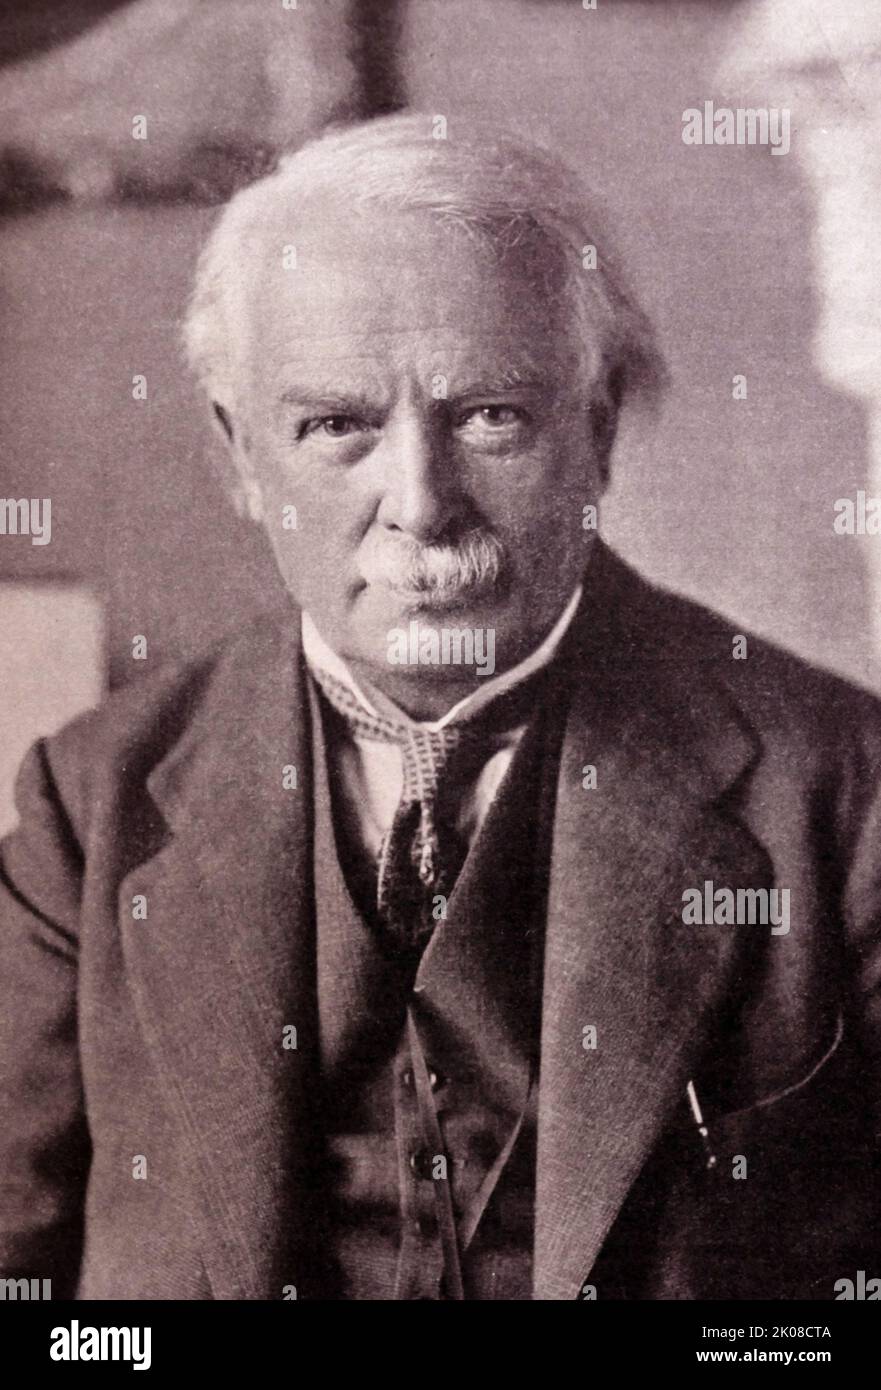 David Lloyd George, 1st Earl Lloyd-George of Dwyfor, OM PC (17 January 1863 - 26 March 1945) was Prime Minister of the United Kingdom from 1916 to 1922. He was a Liberal Party politician from Wales, known for leading the United Kingdom during the First World War, social reform policies including the National Insurance Act 1911 Stock Photo